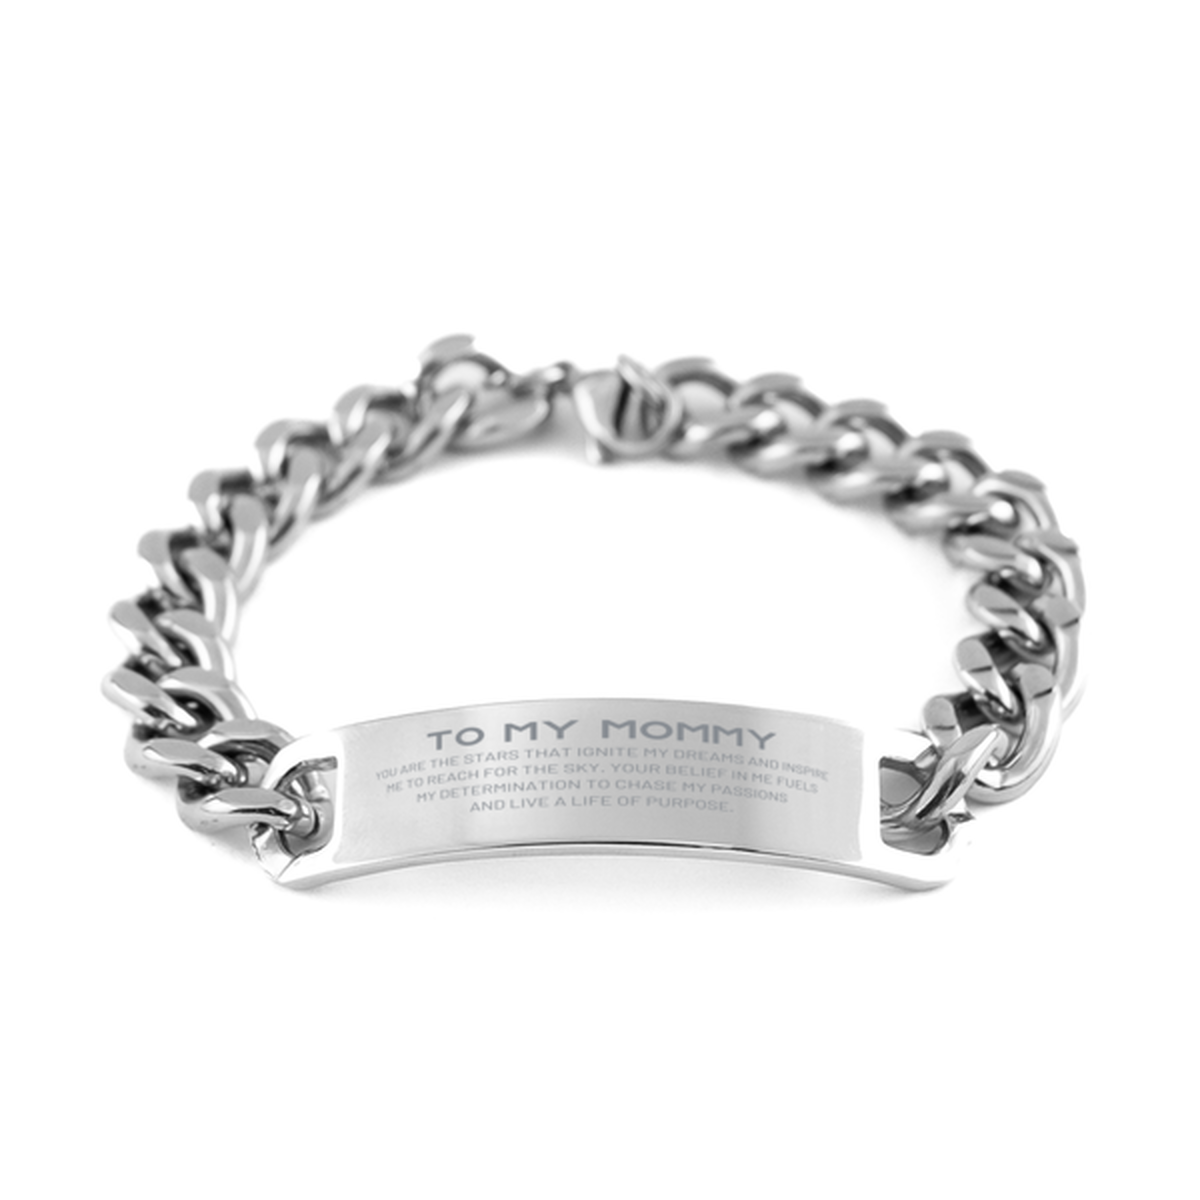 To My Mommy Cuban Chain Stainless Steel Bracelet, You are the stars that ignite my dreams and inspire me to reach for the sky, Birthday Unique Gifts For Mommy, Thank You Gifts For Mommy